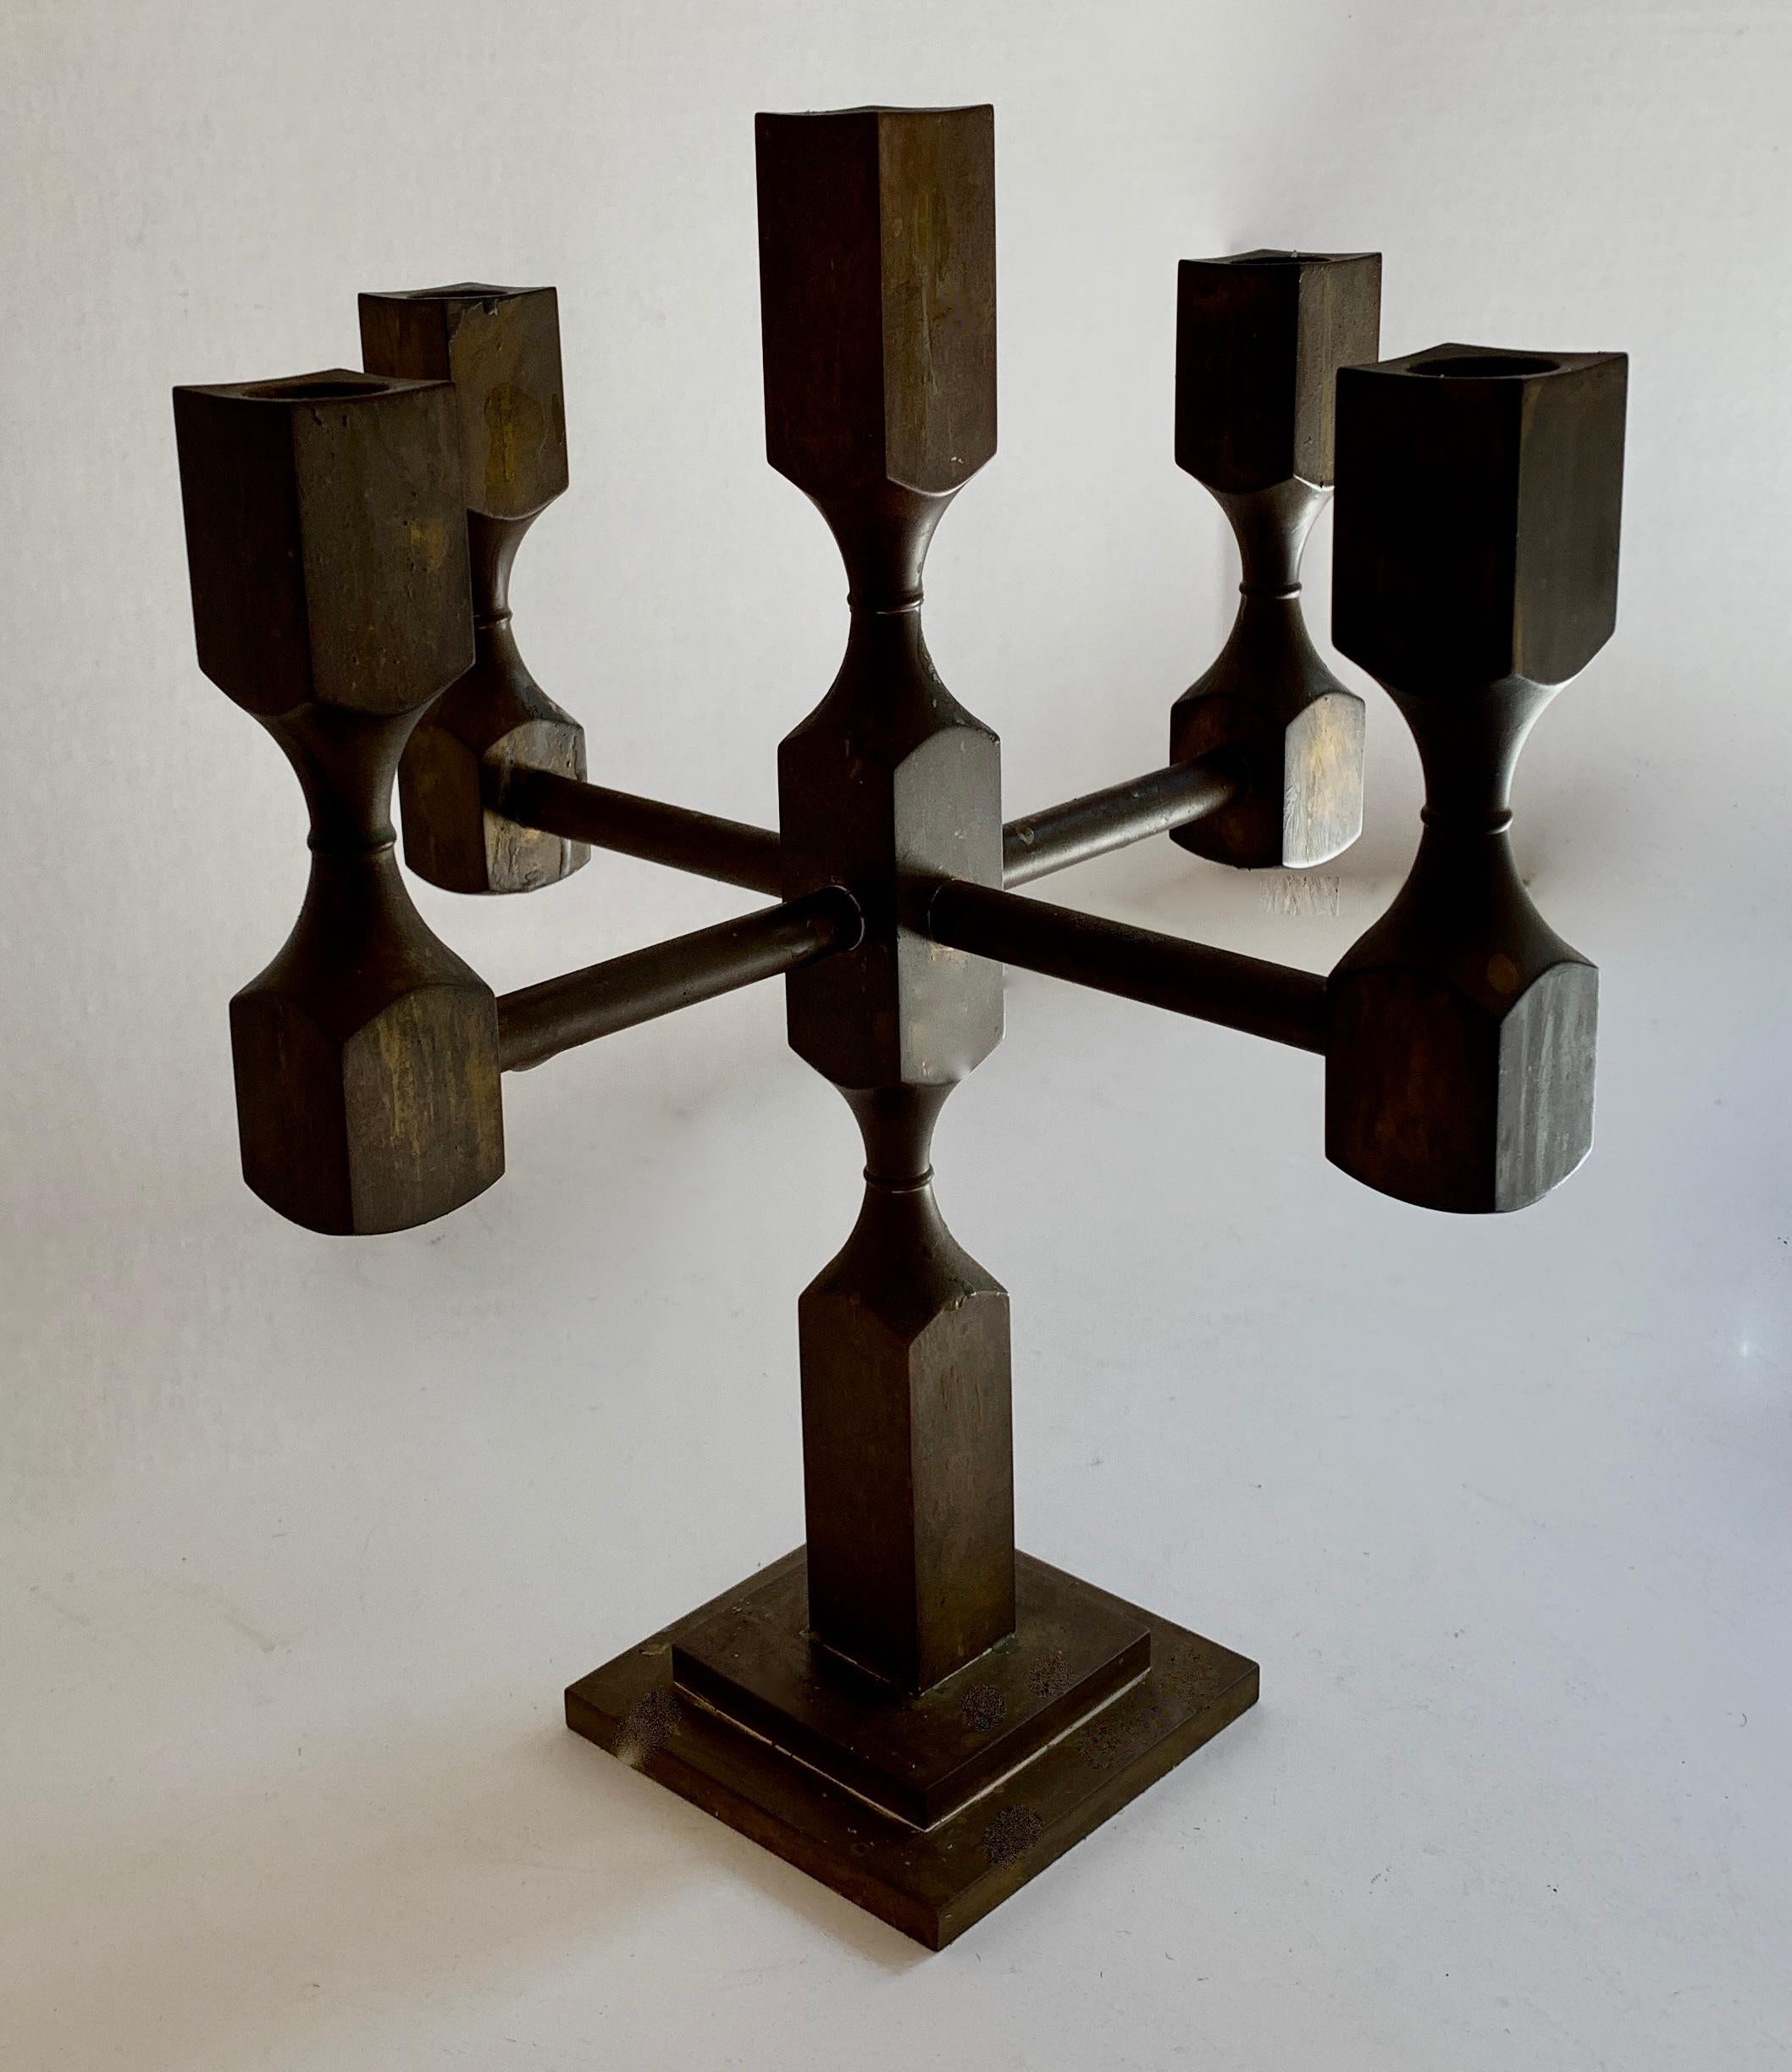 Candelabra by Lars Bergsten, Gusum Metallslöjden, Sweden. A Modernist solid brass candelabra - clean lines, architectural - works well in any environment, from contemporary to more traditional... very heavy at and substantial piece.

The patina is